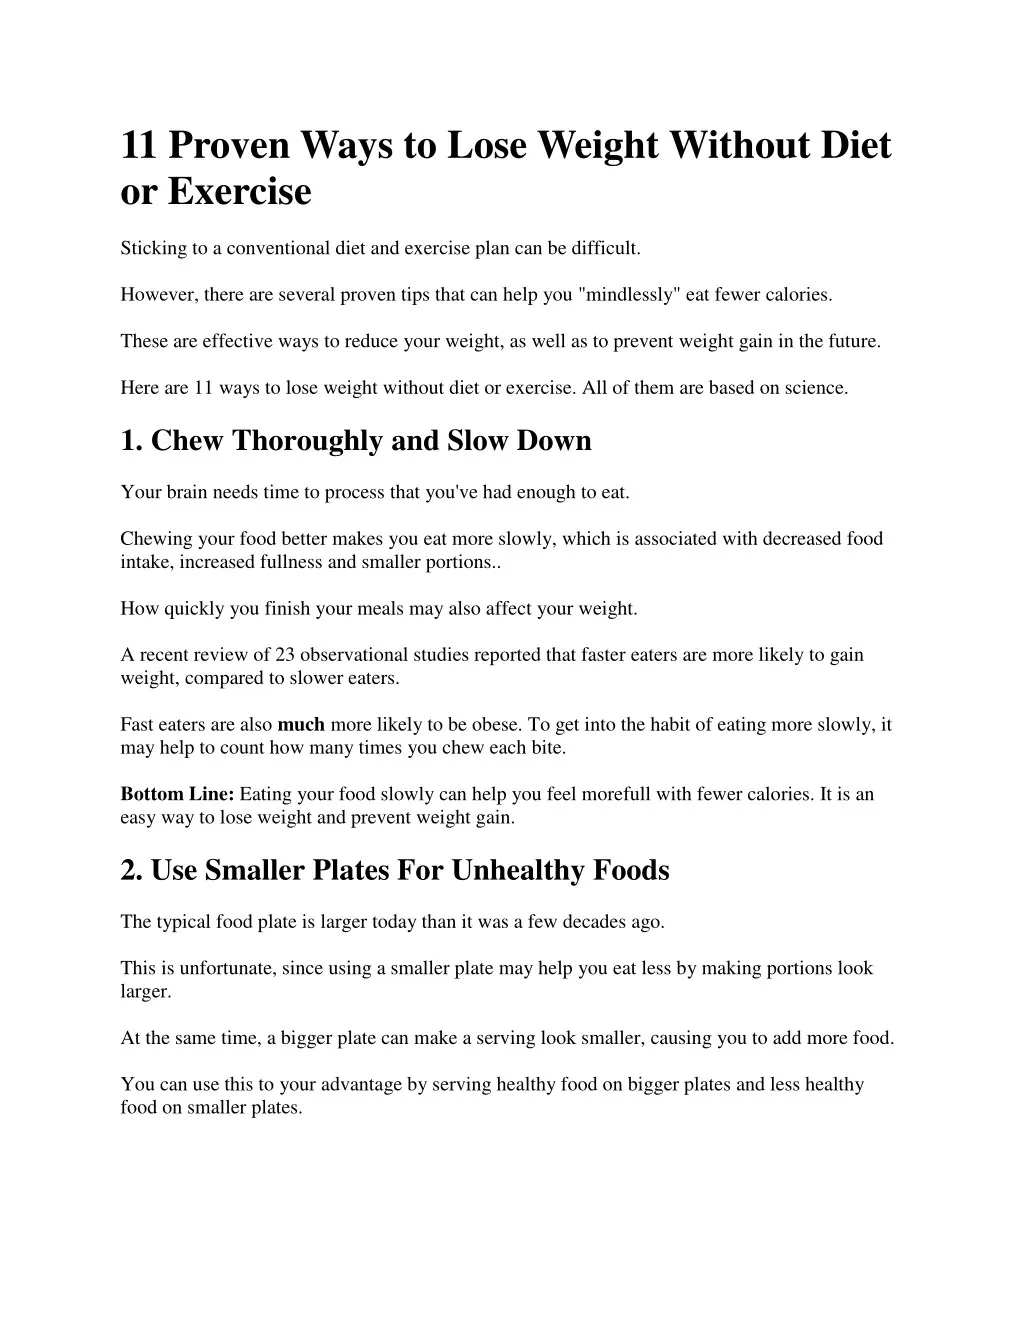 PPT - 11 Proven Ways to Lose Weight Without Diet or Exercise PowerPoint  Presentation - ID:7676468